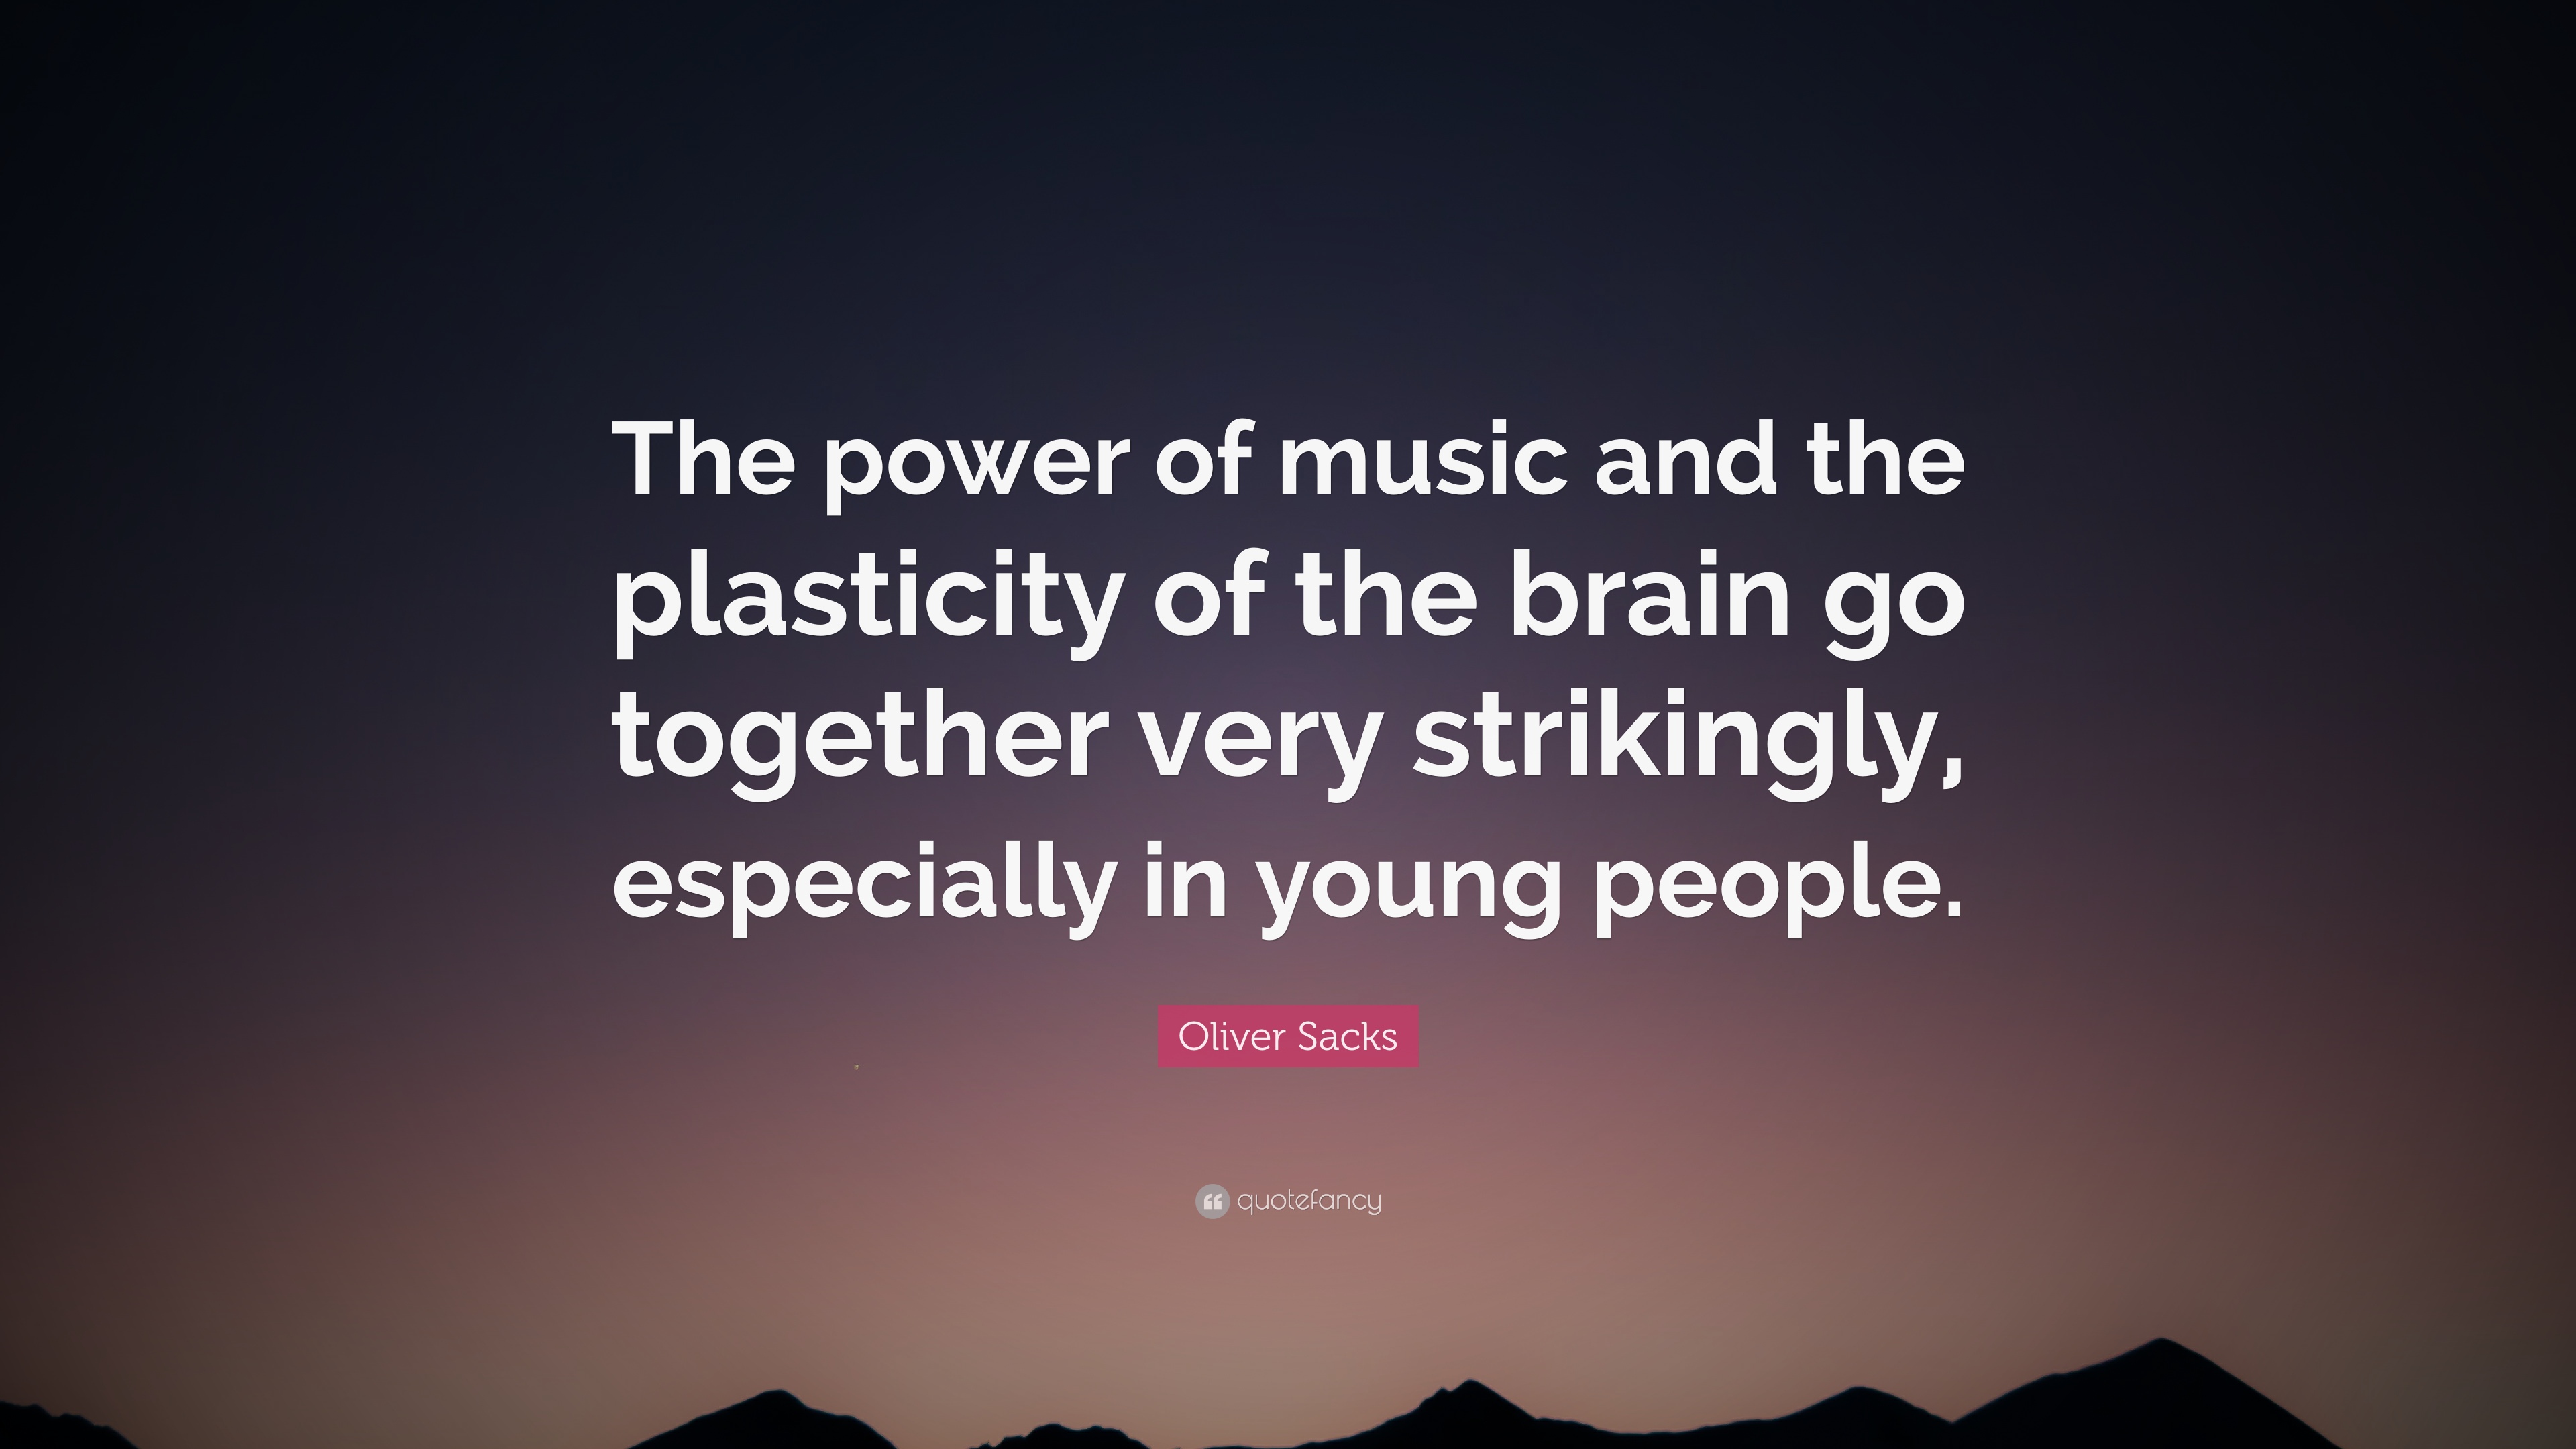 the power of music and the plasticity of the brain go together very strikingly especially in young people. oliver sacks